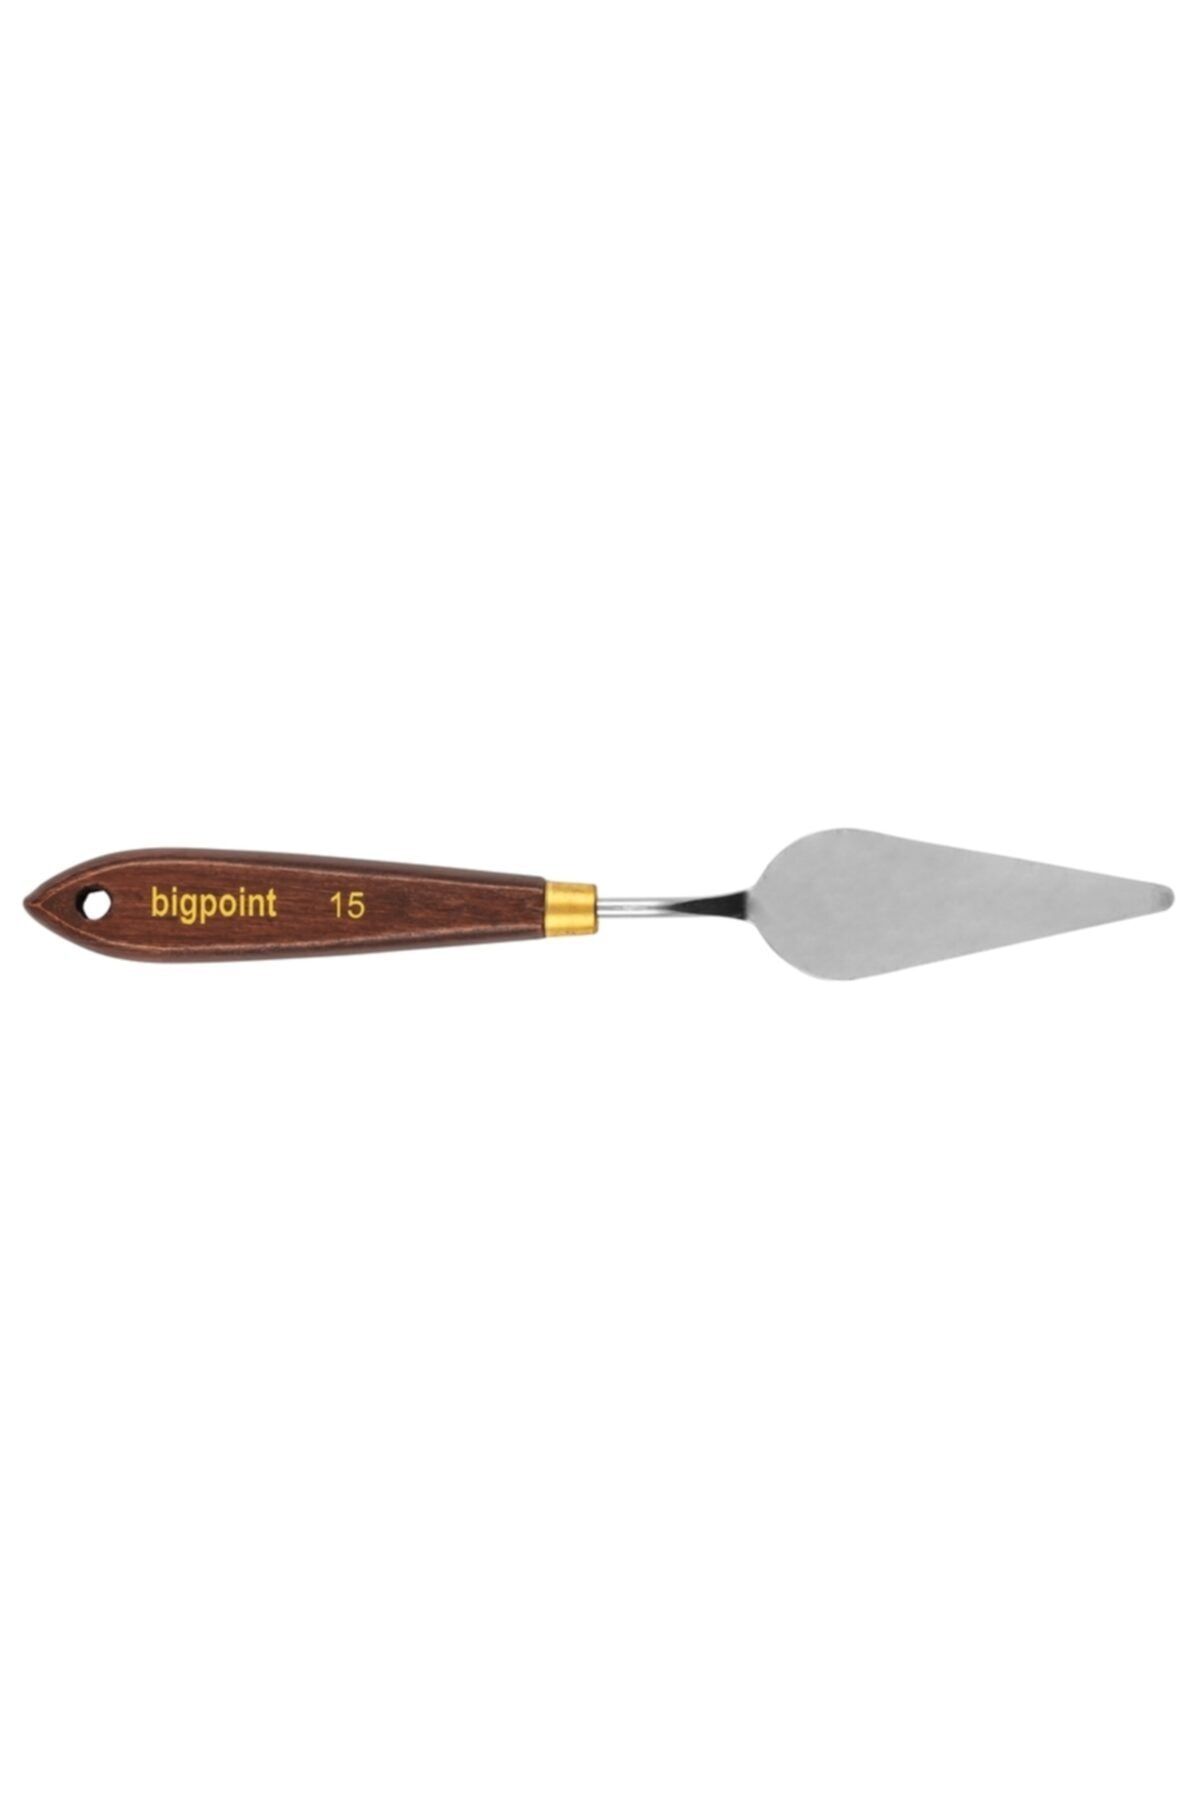 Bigpoint Metal Spatula No: 15 (painting Knife)